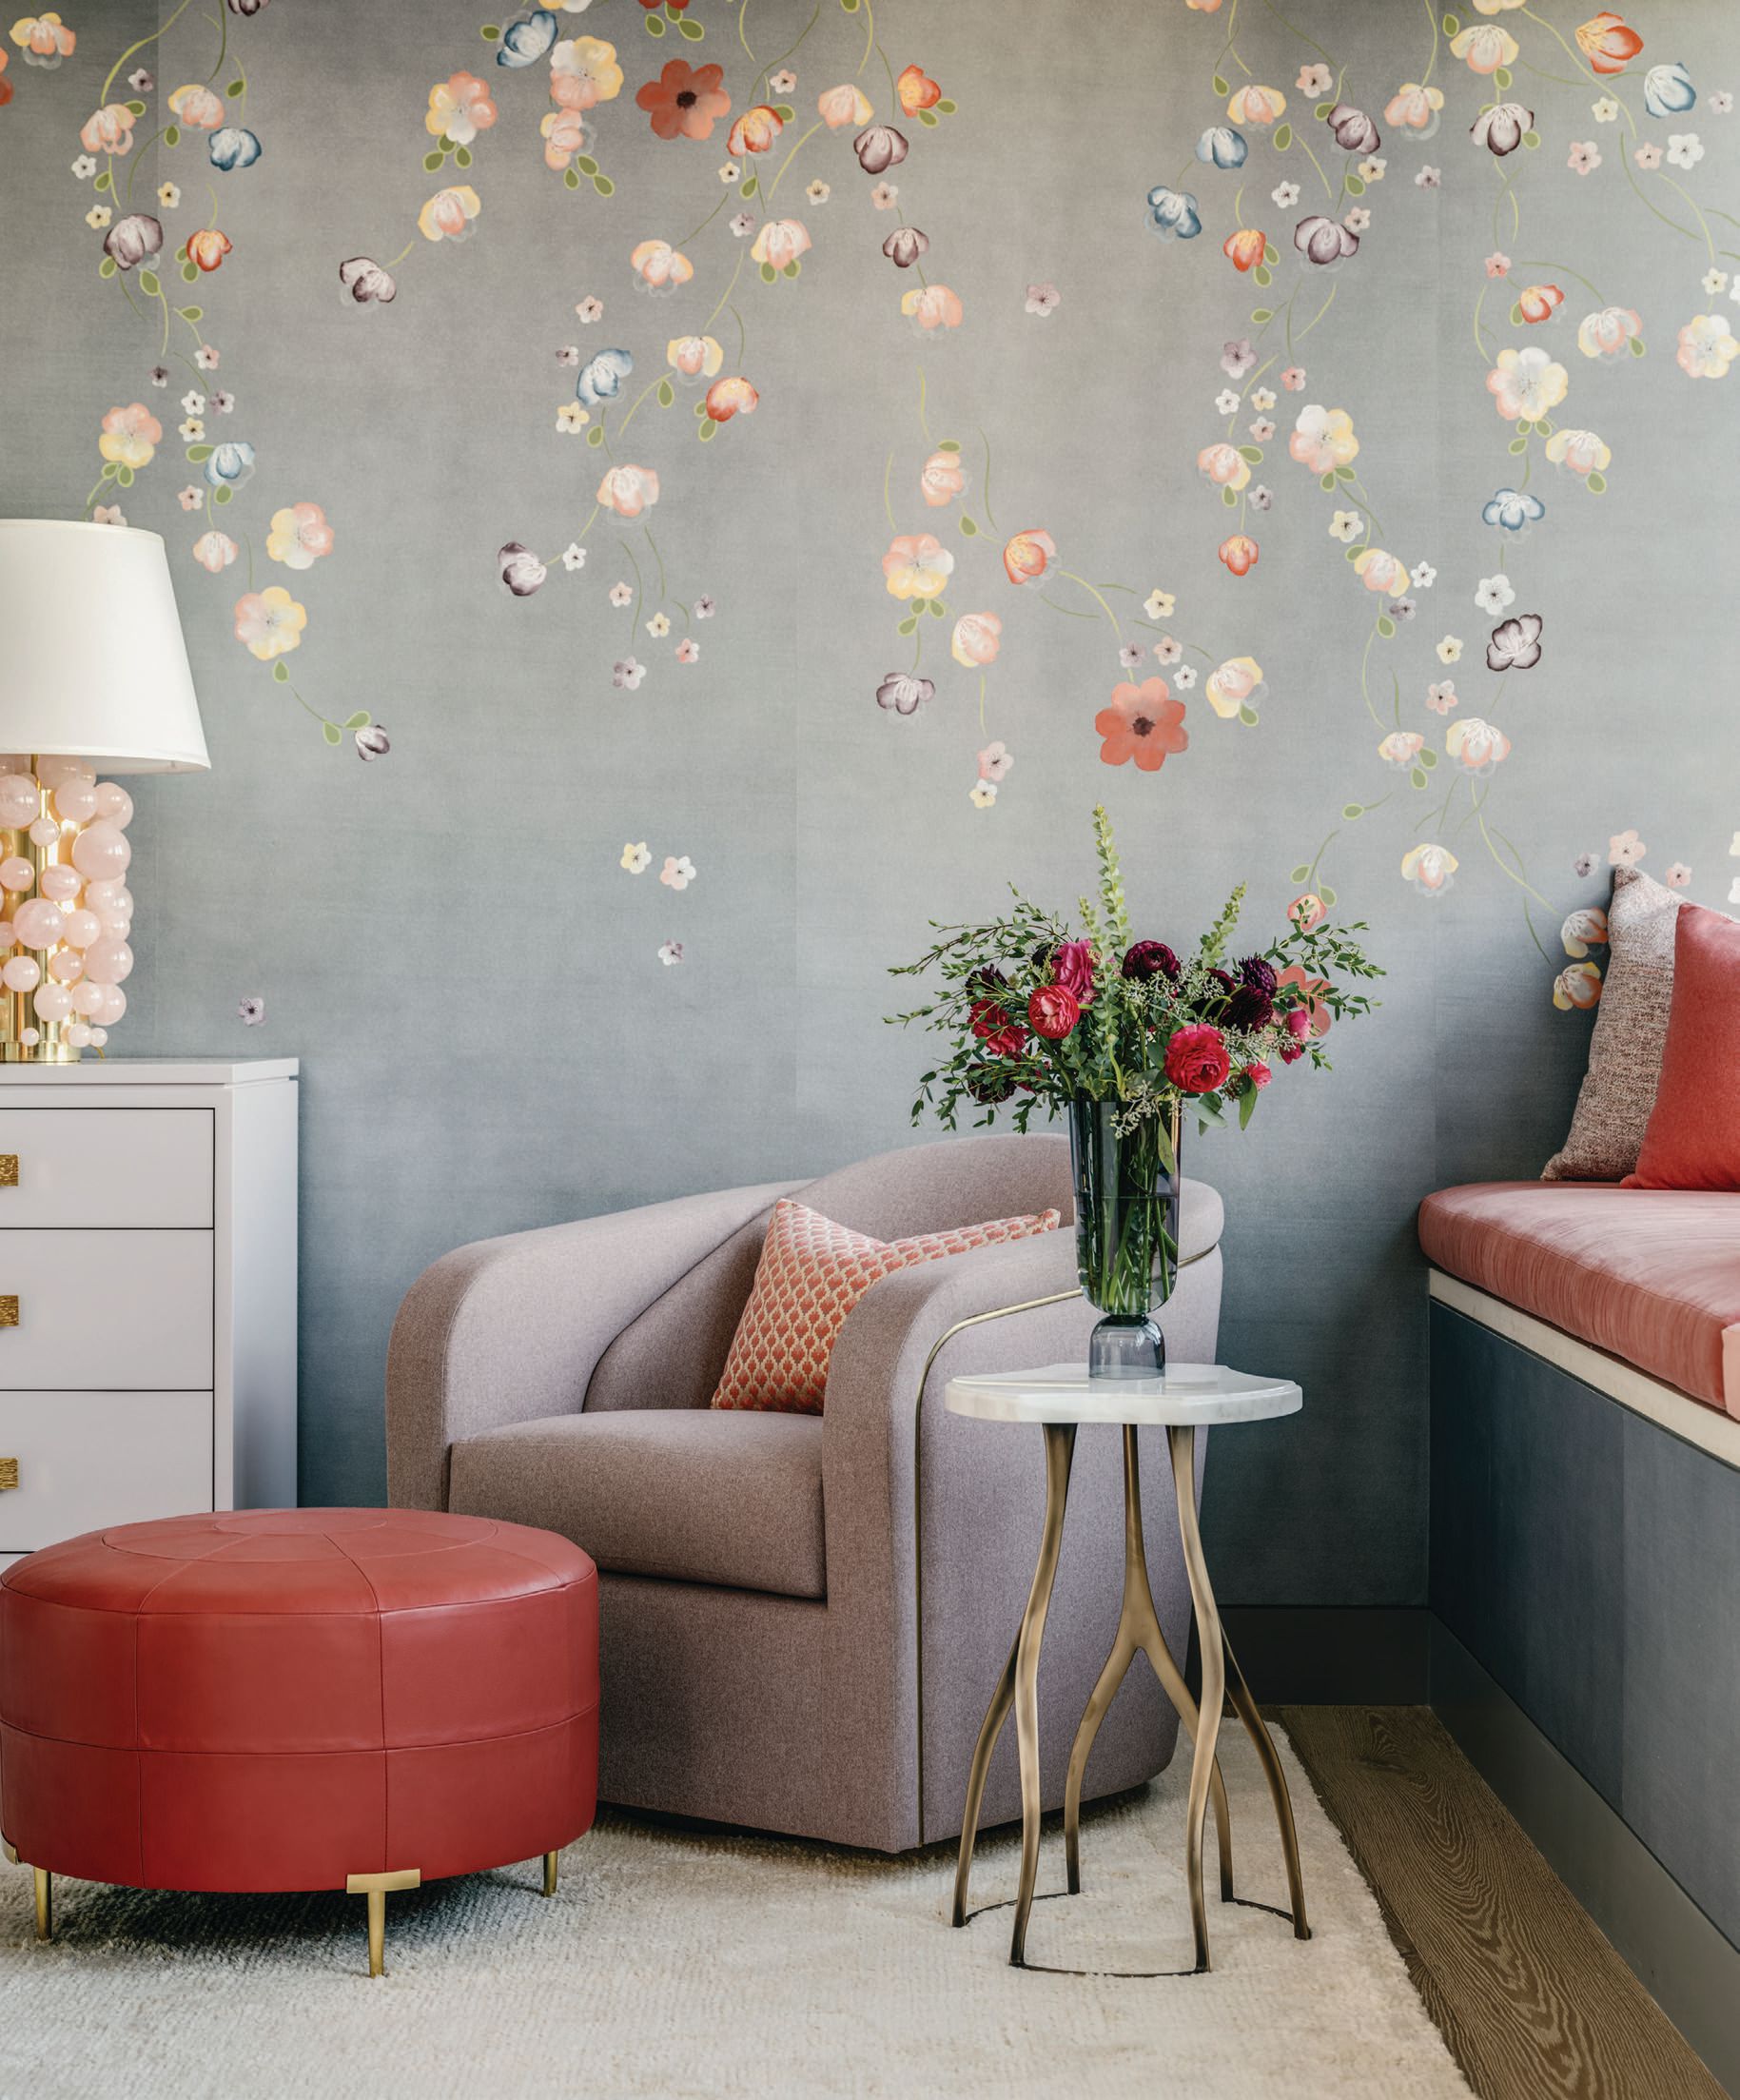 Falling Flowers wallpaper from de Gournay brightens the primary suite. PHOTOGRAPHED BY CHRISTOPHER STARK